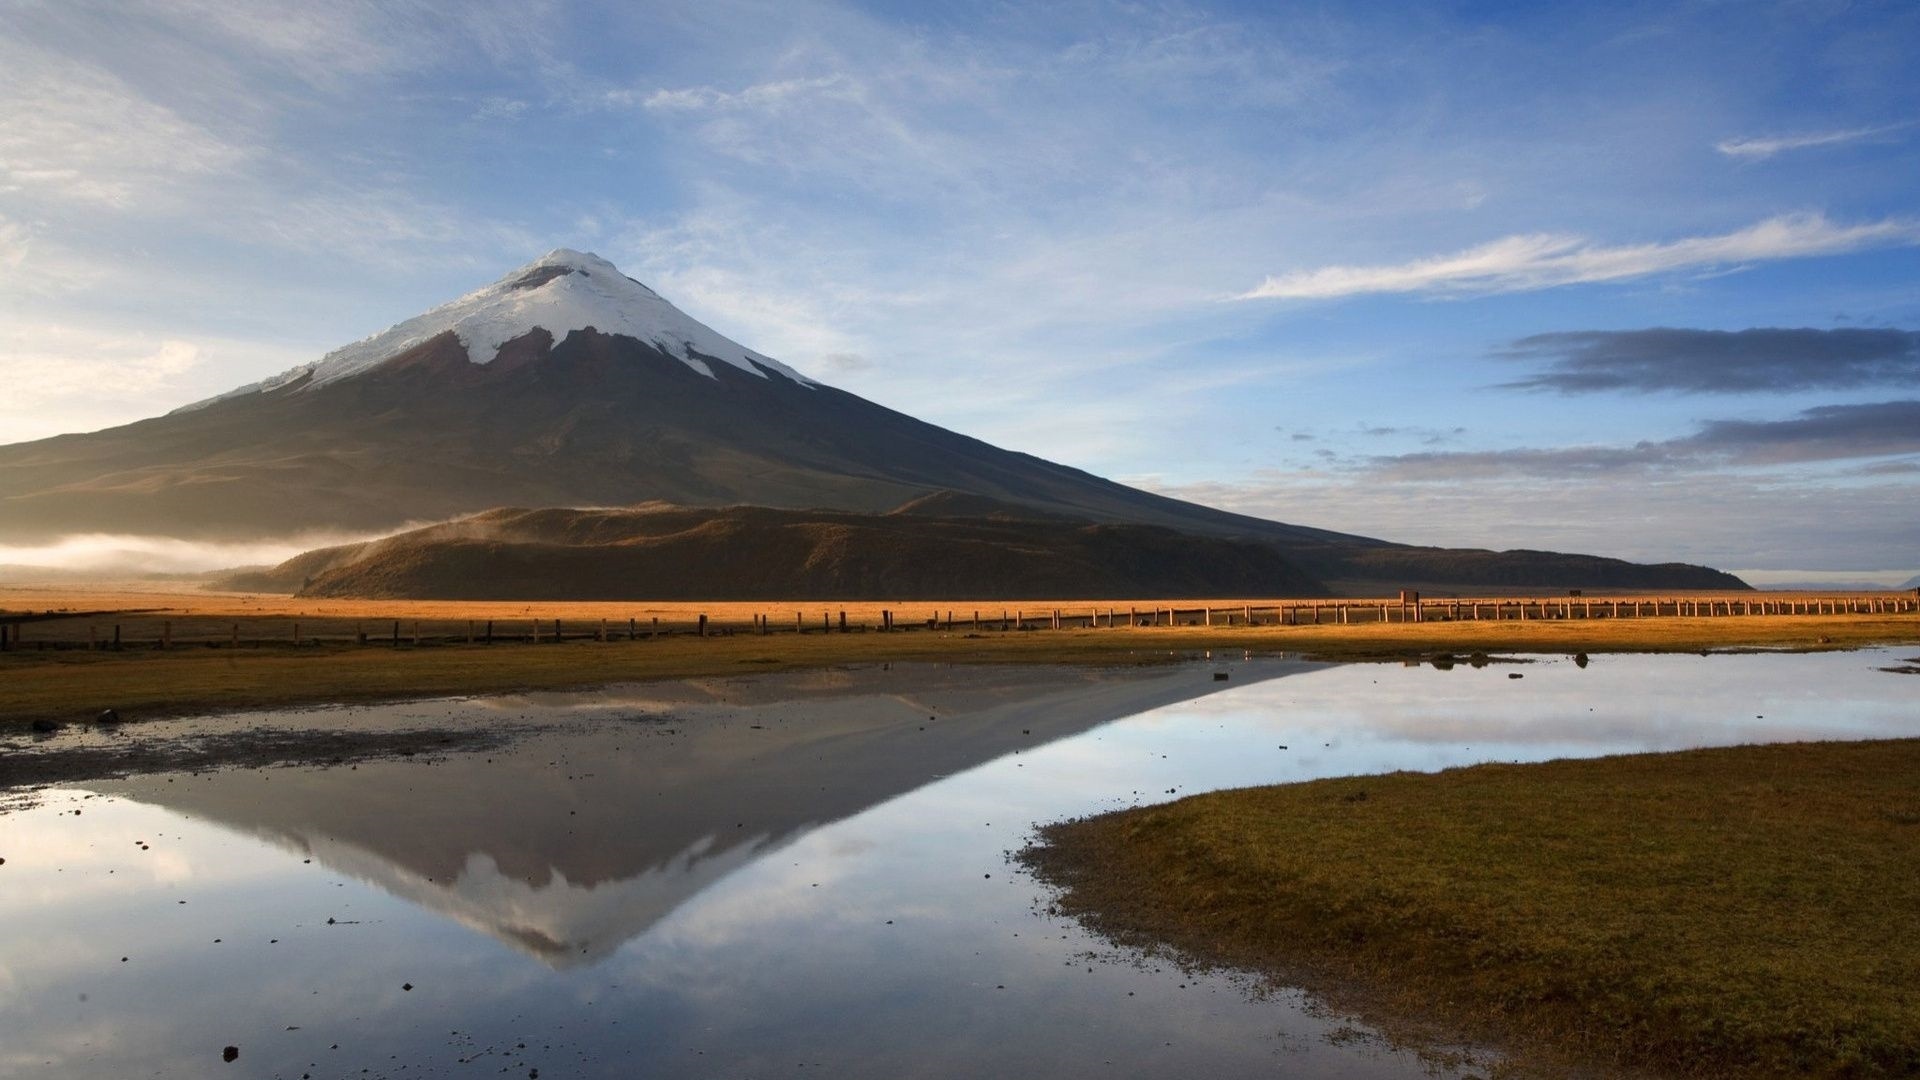 Ecuador: Limpiopungo lagoon, One of the most visited places in Cotopaxi National Park. 1920x1080 Full HD Background.